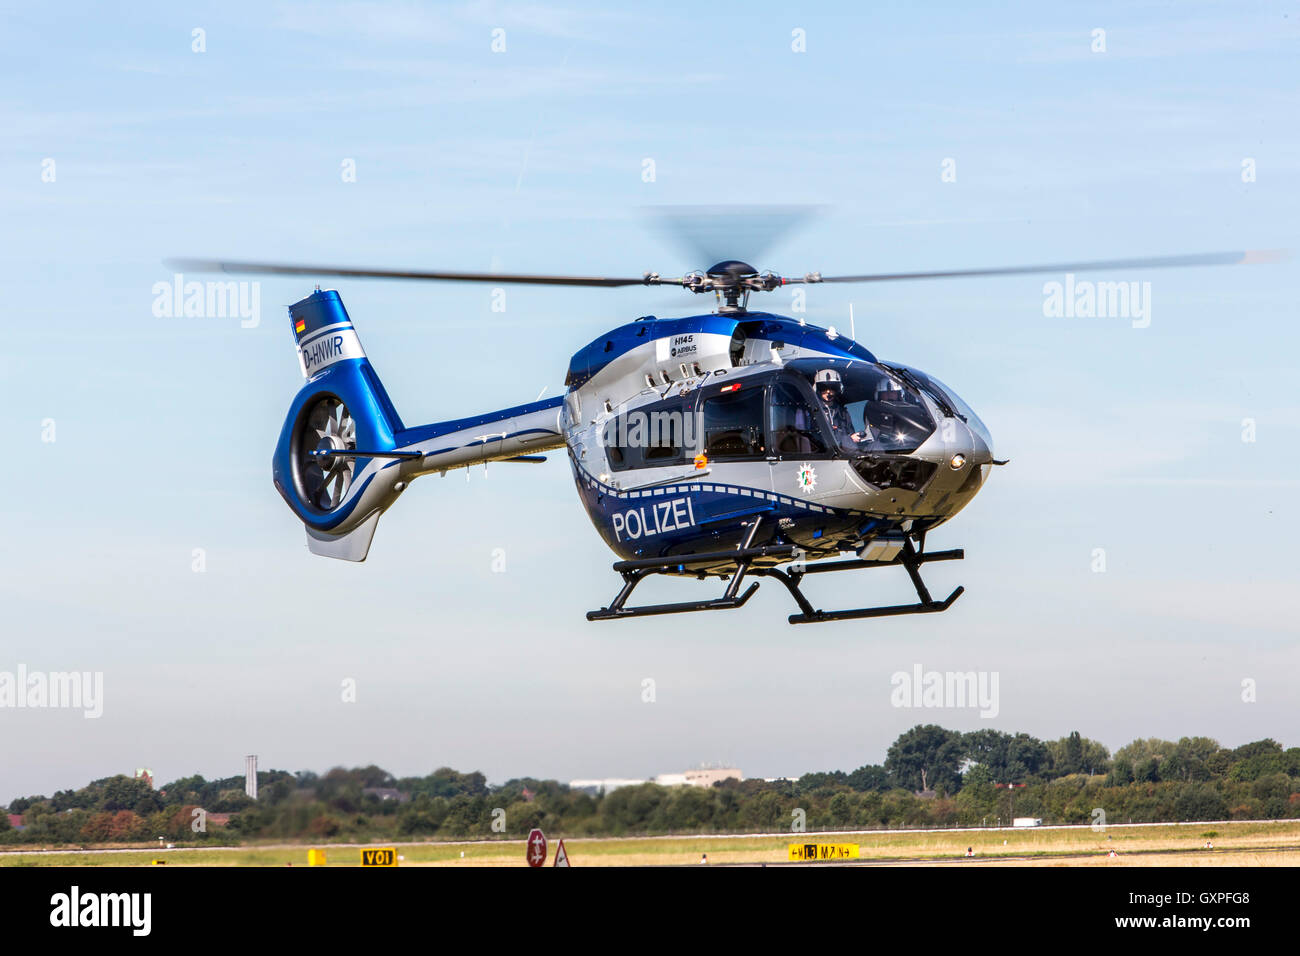 Police Helicopter Airbus H145, Stock Photo